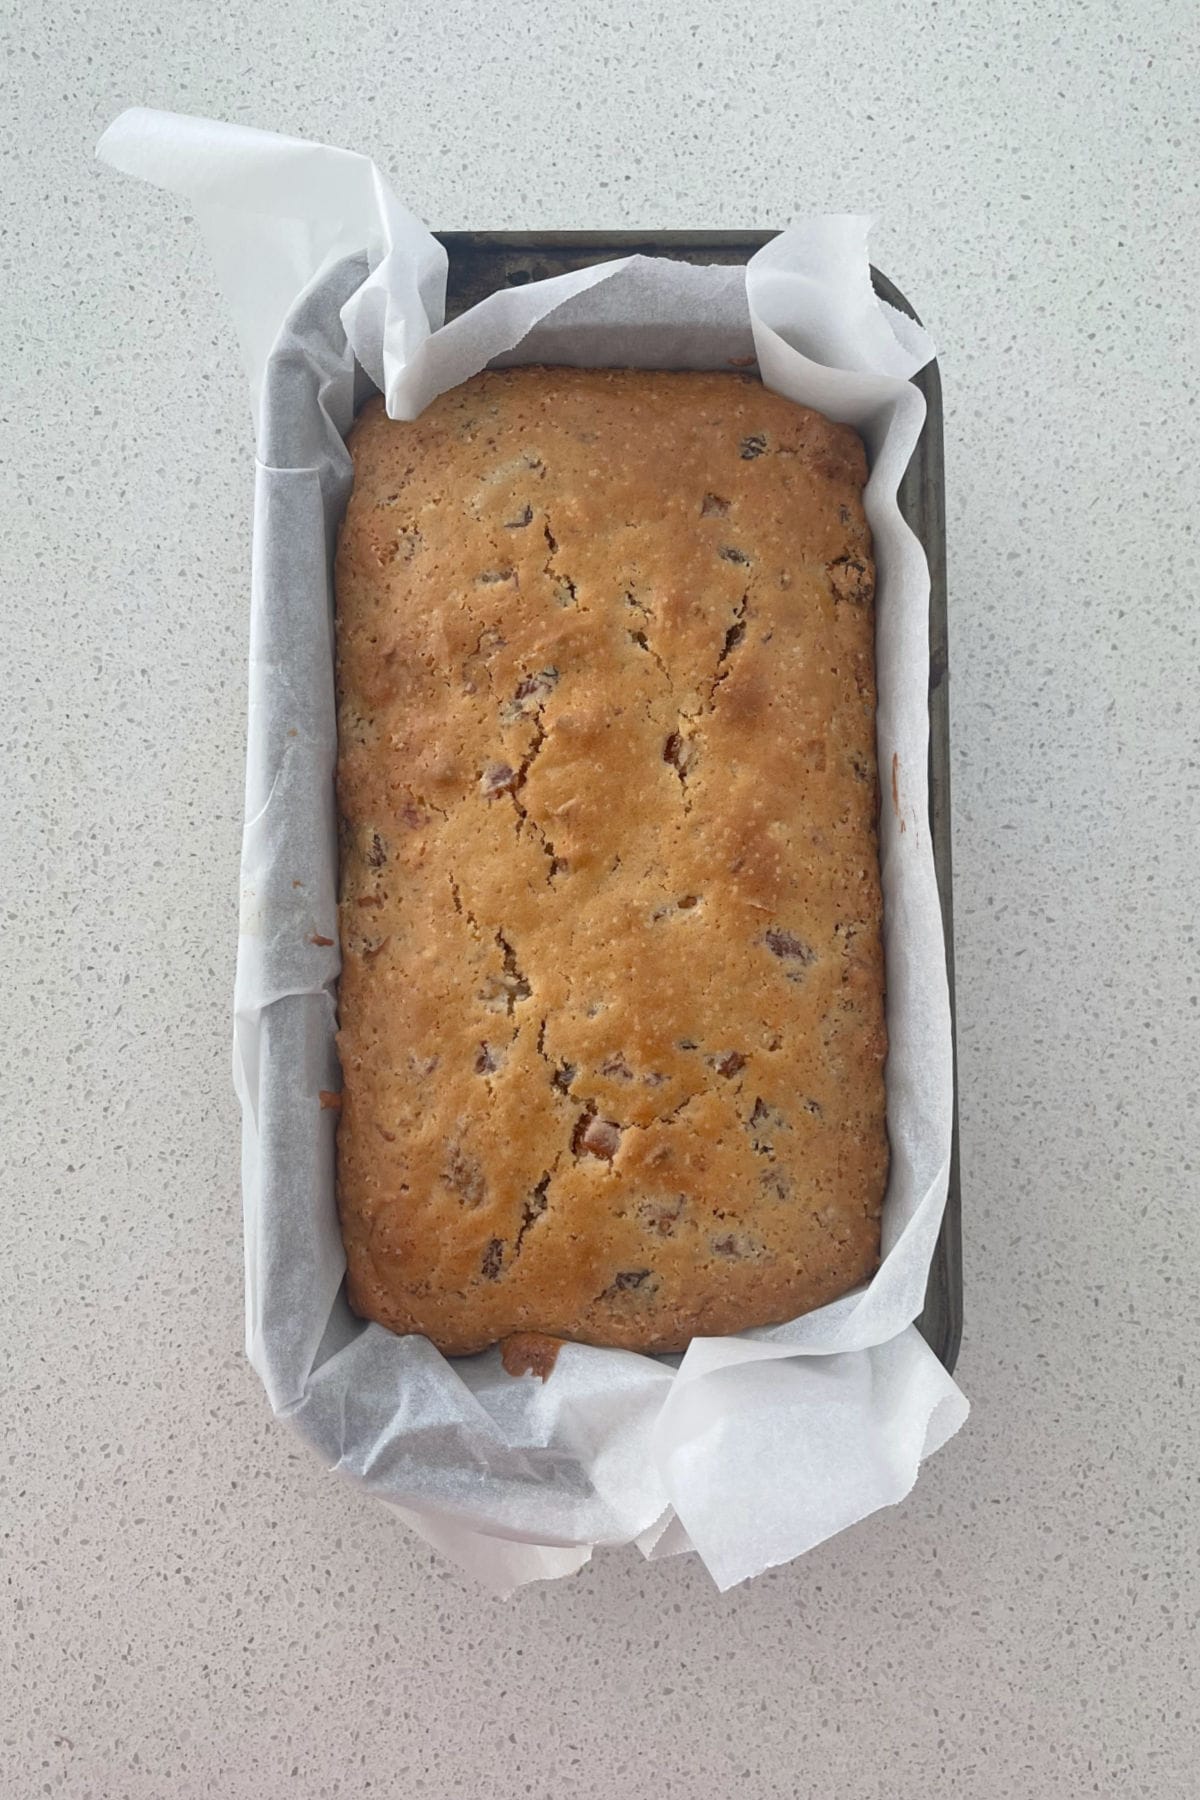 Thermomix Fruit Loaf in baking dish.